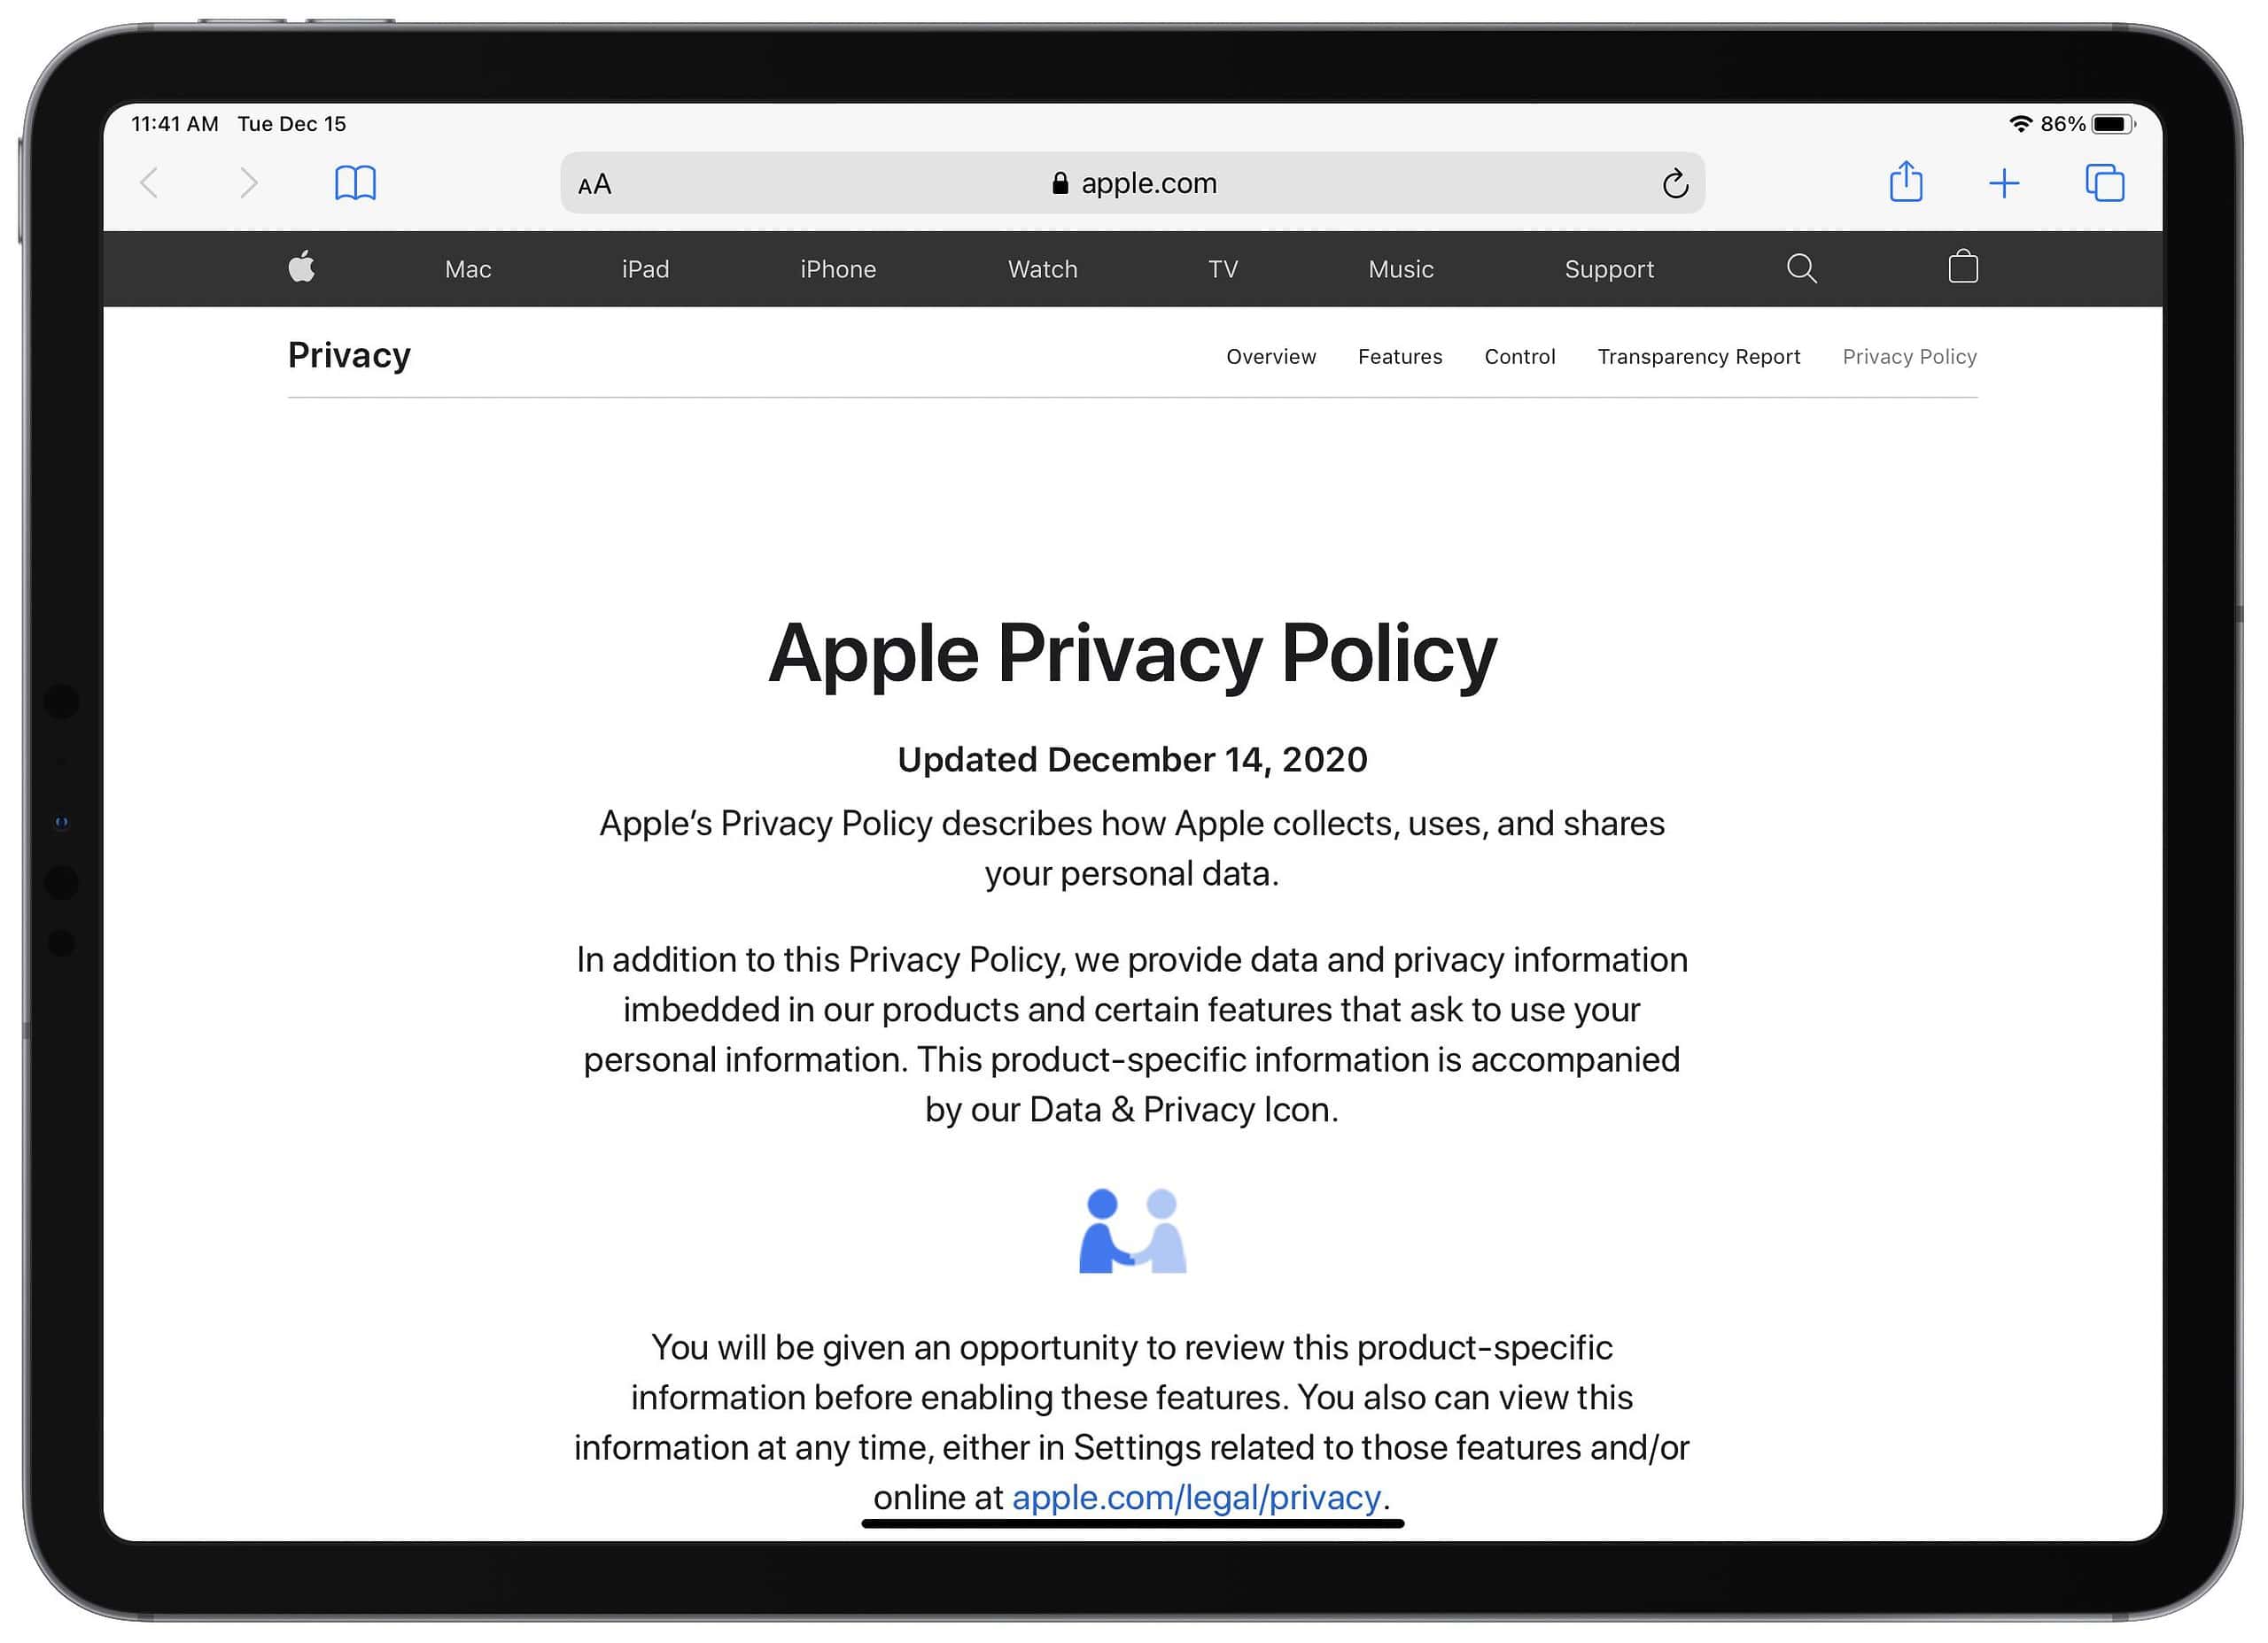 Apple privacy policy page screenshot